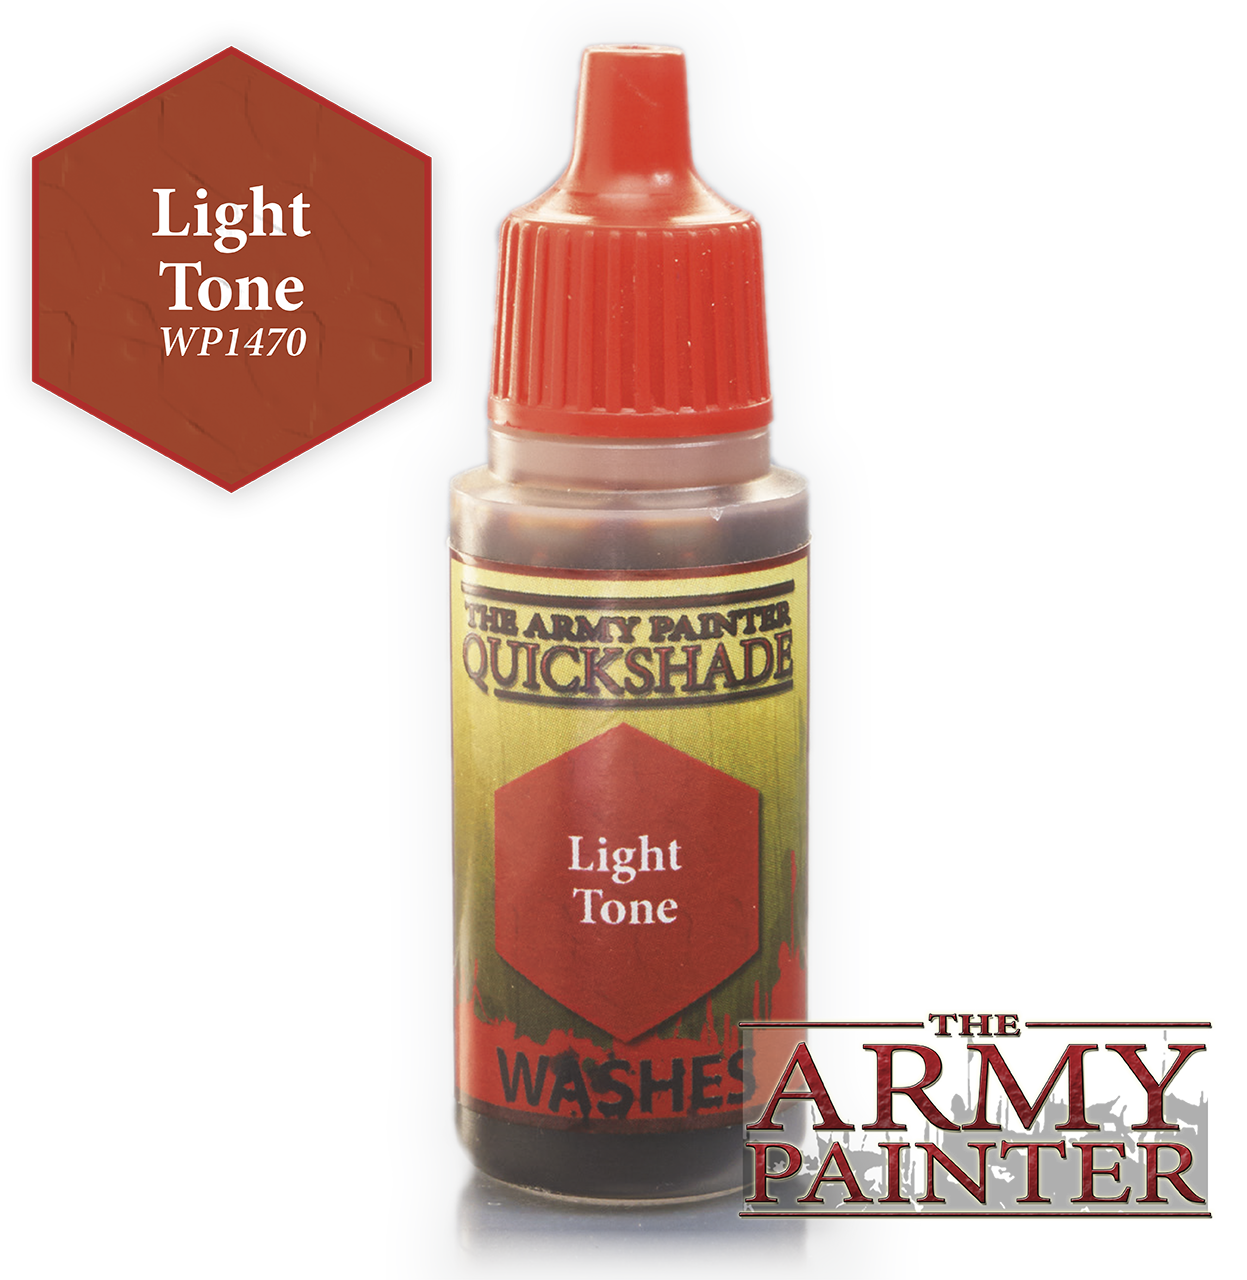 The ARMY PAINTER: Washes Warpaints - Light Tone | Tacoma Games